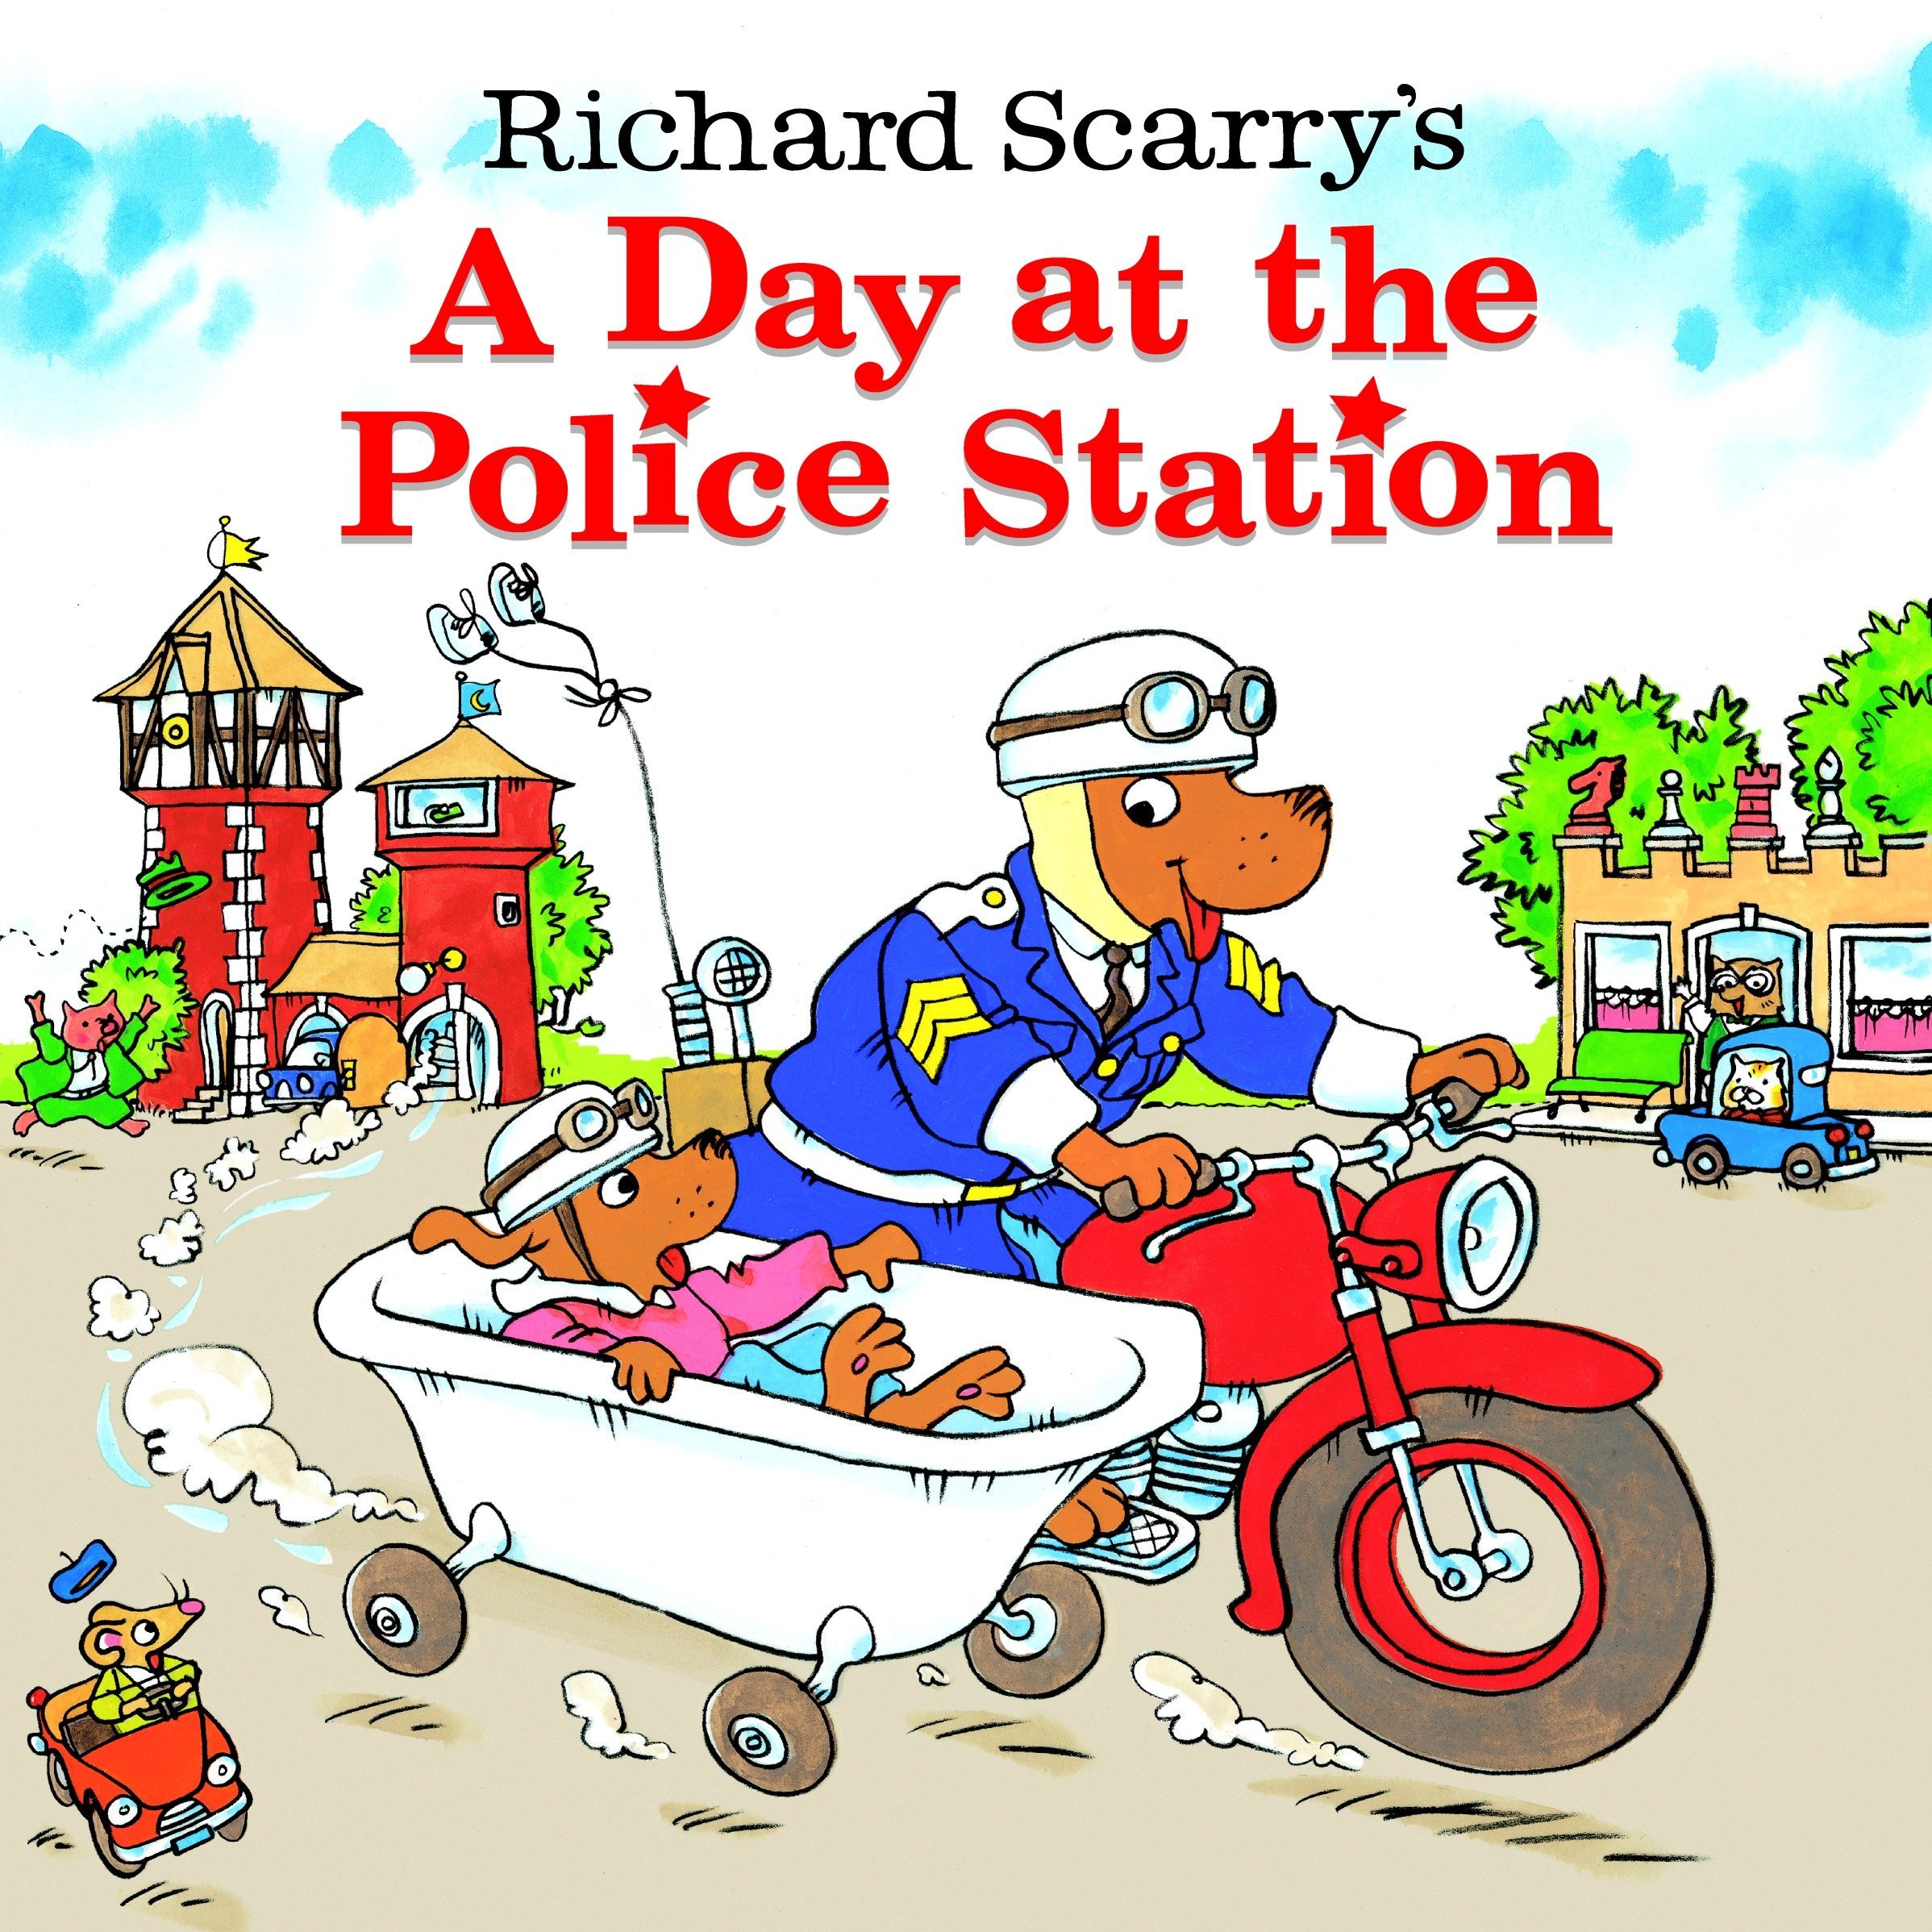 speech and language teaching concepts for A Day At The Police Station in speech therapy​ ​